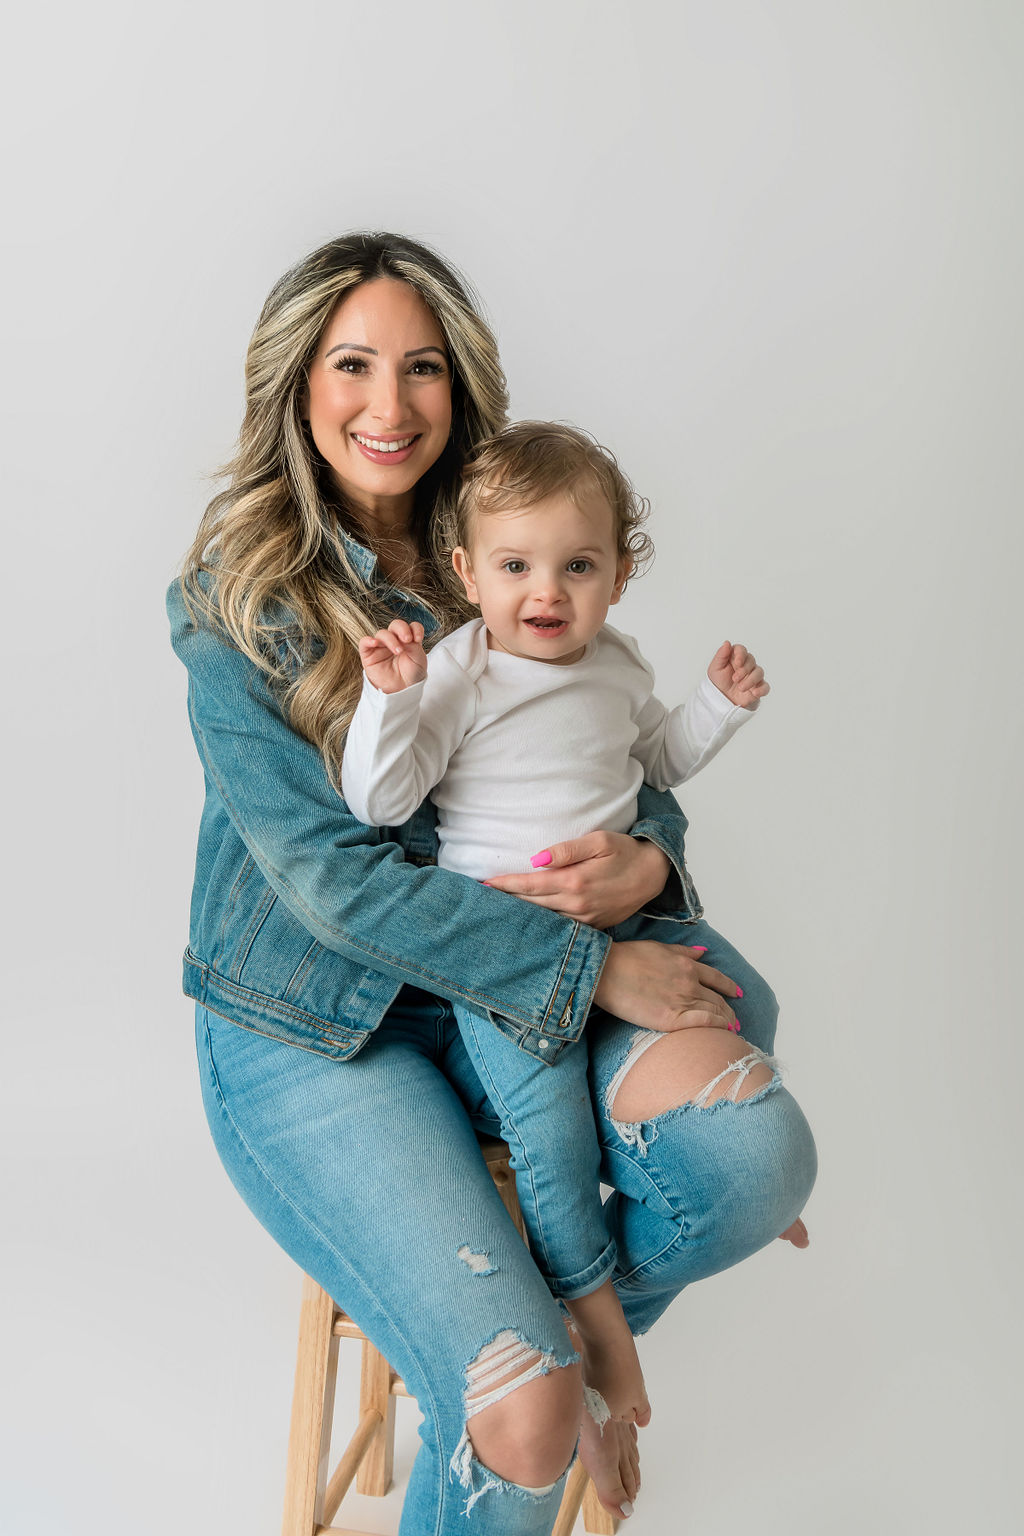 A happy mom sits on a stool in a studio wearing a denim jacket and pants with her toddler in a white shirt and jeans sitting in her lap